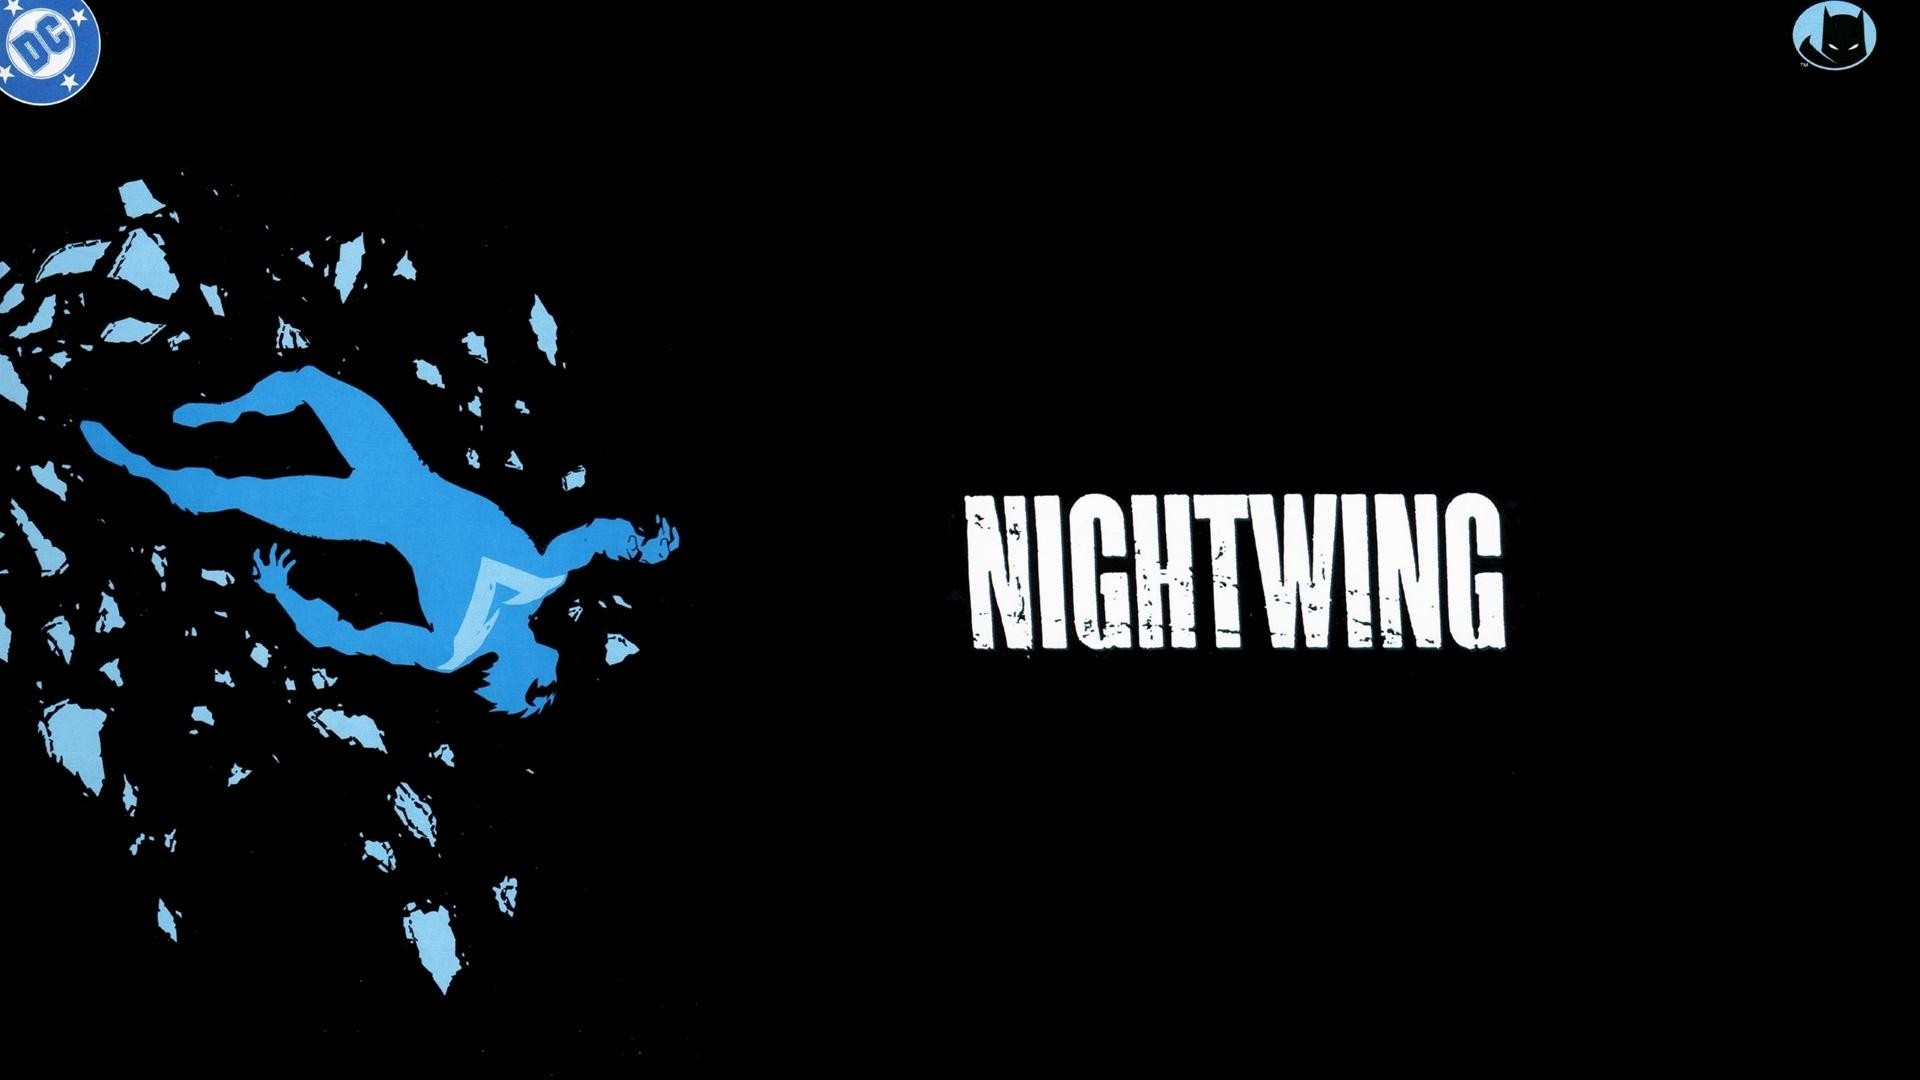 Wallpaper.wiki Download Images Nightwing HD PIC WPE002295